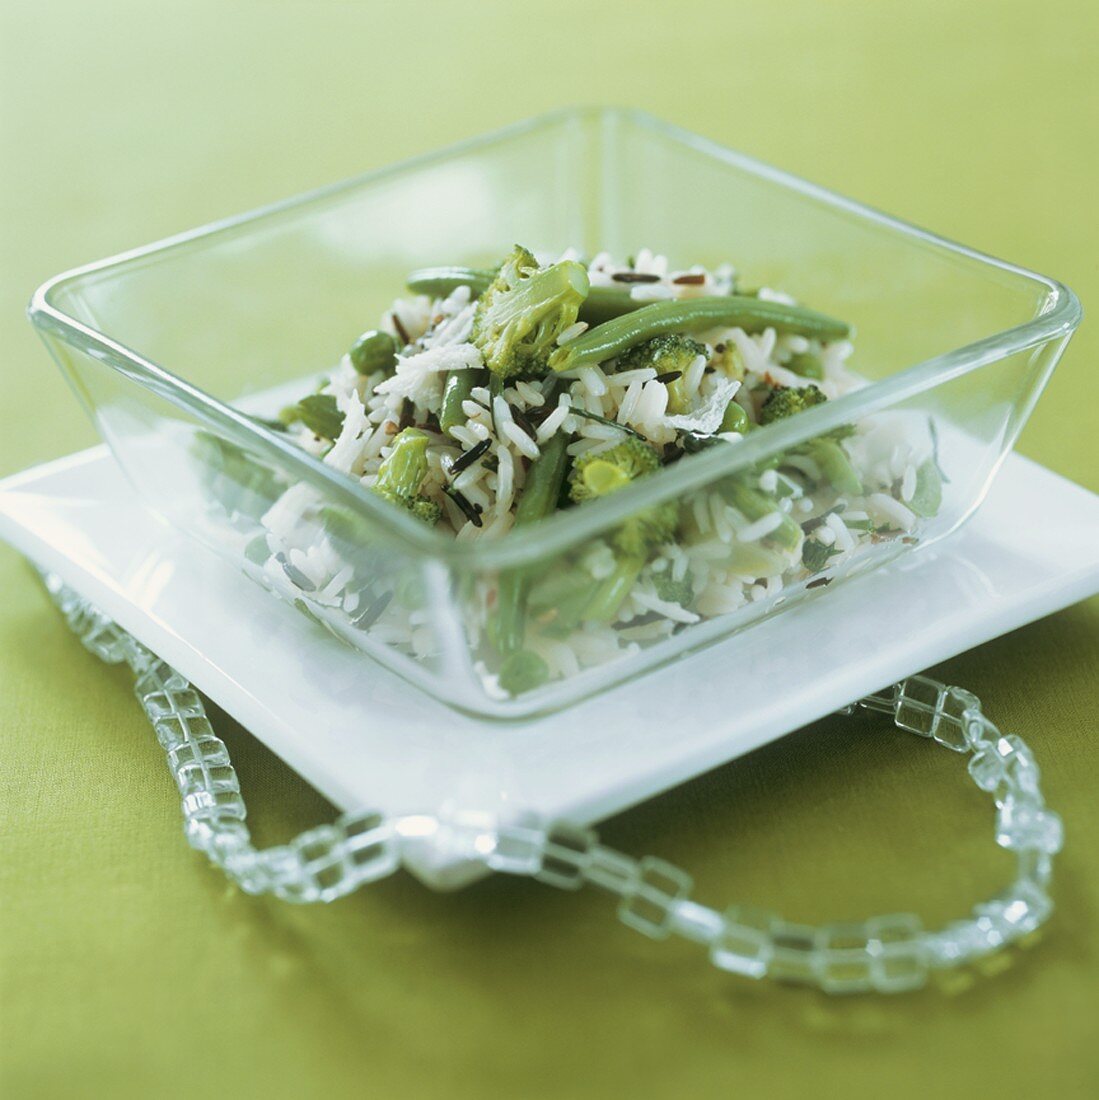 Rice with green vegetables in a glass dish